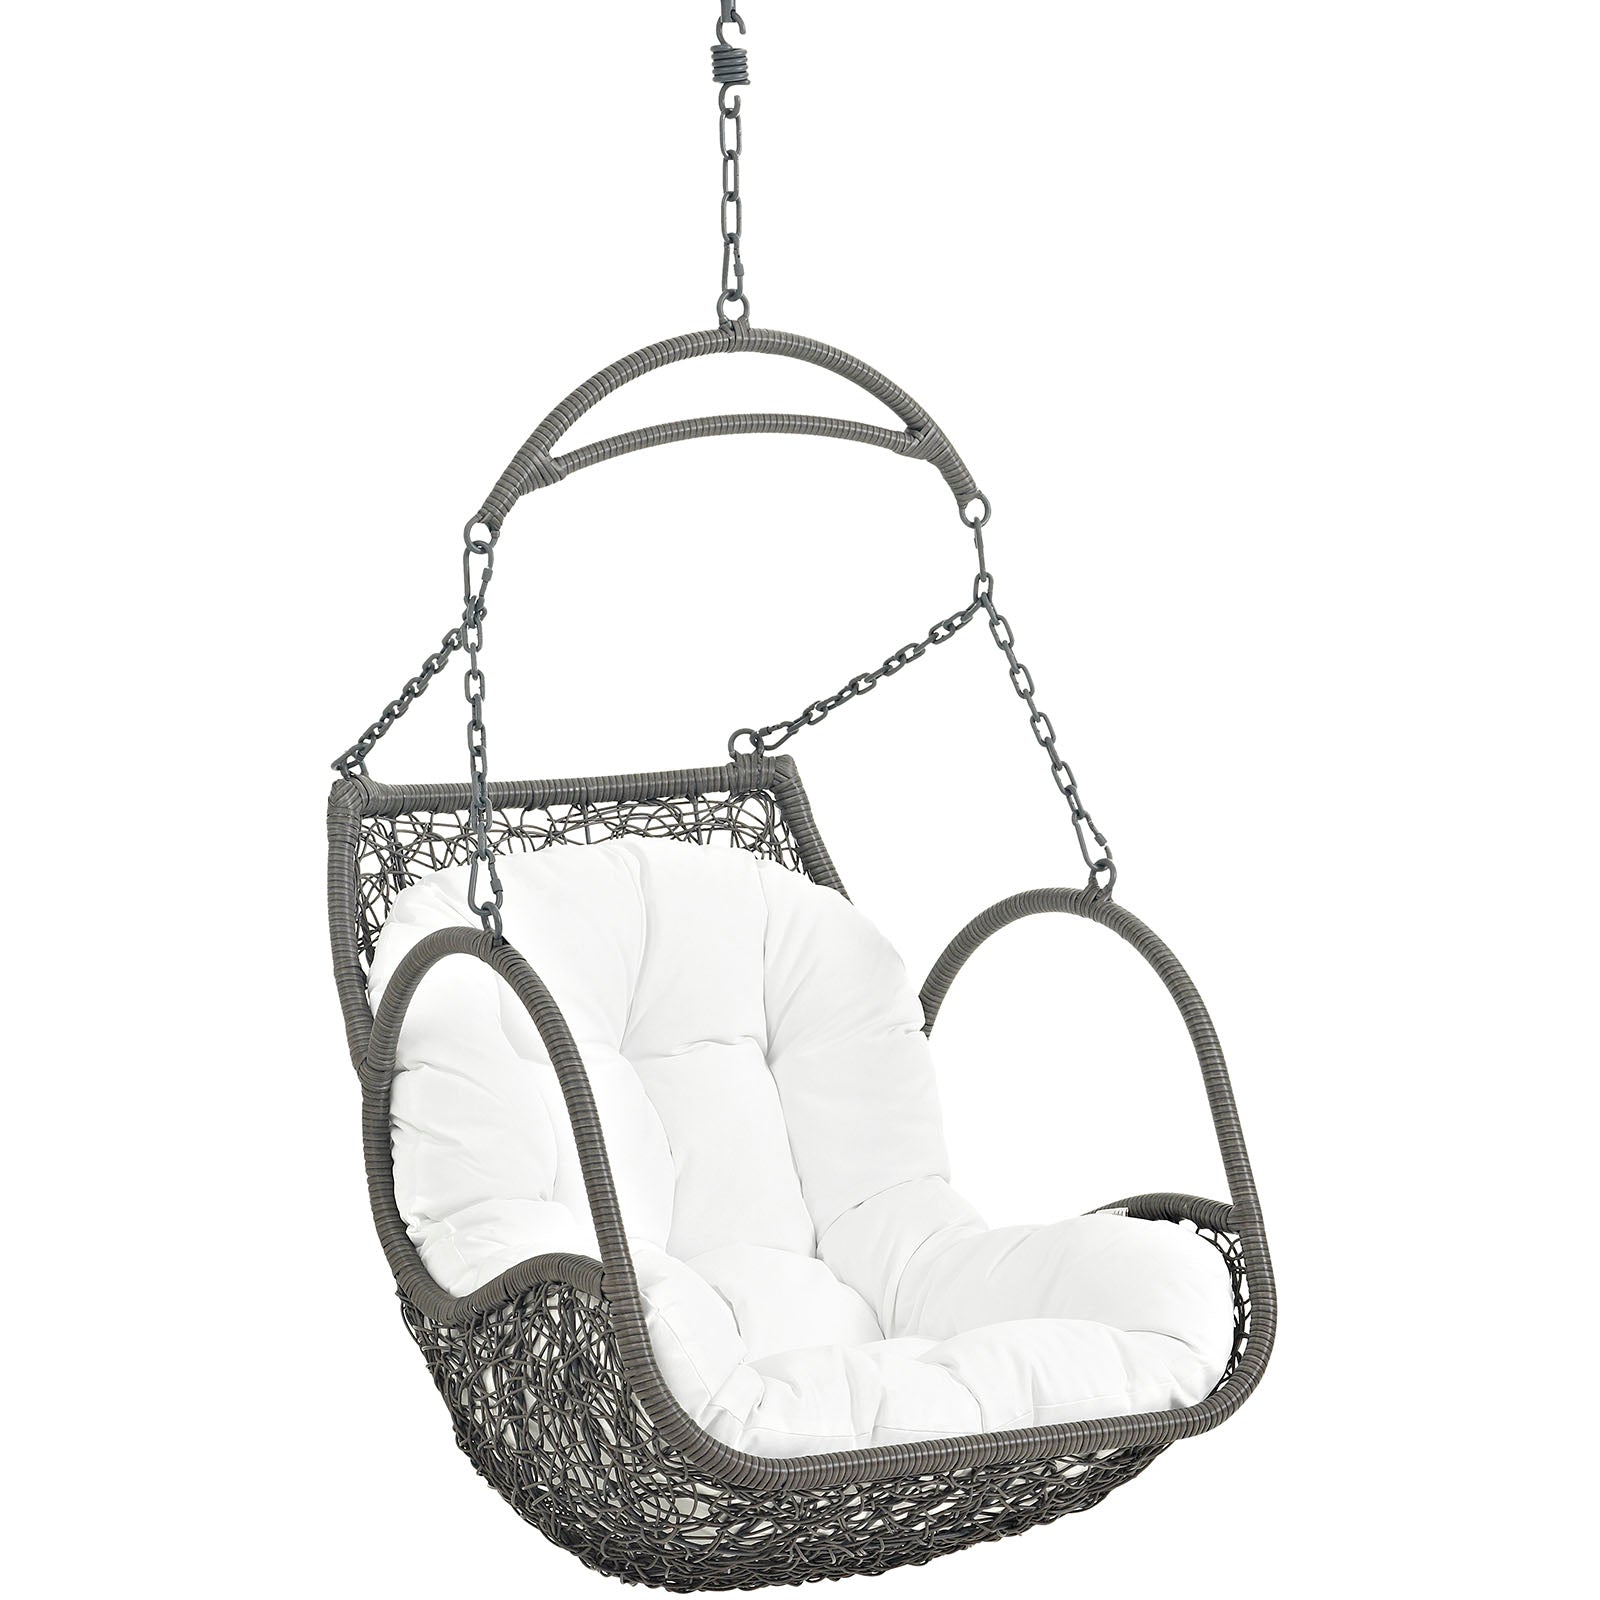 Arbor Outdoor Patio Wood Swing Chair-Outdoor Swing Chair-Modway-Wall2Wall Furnishings